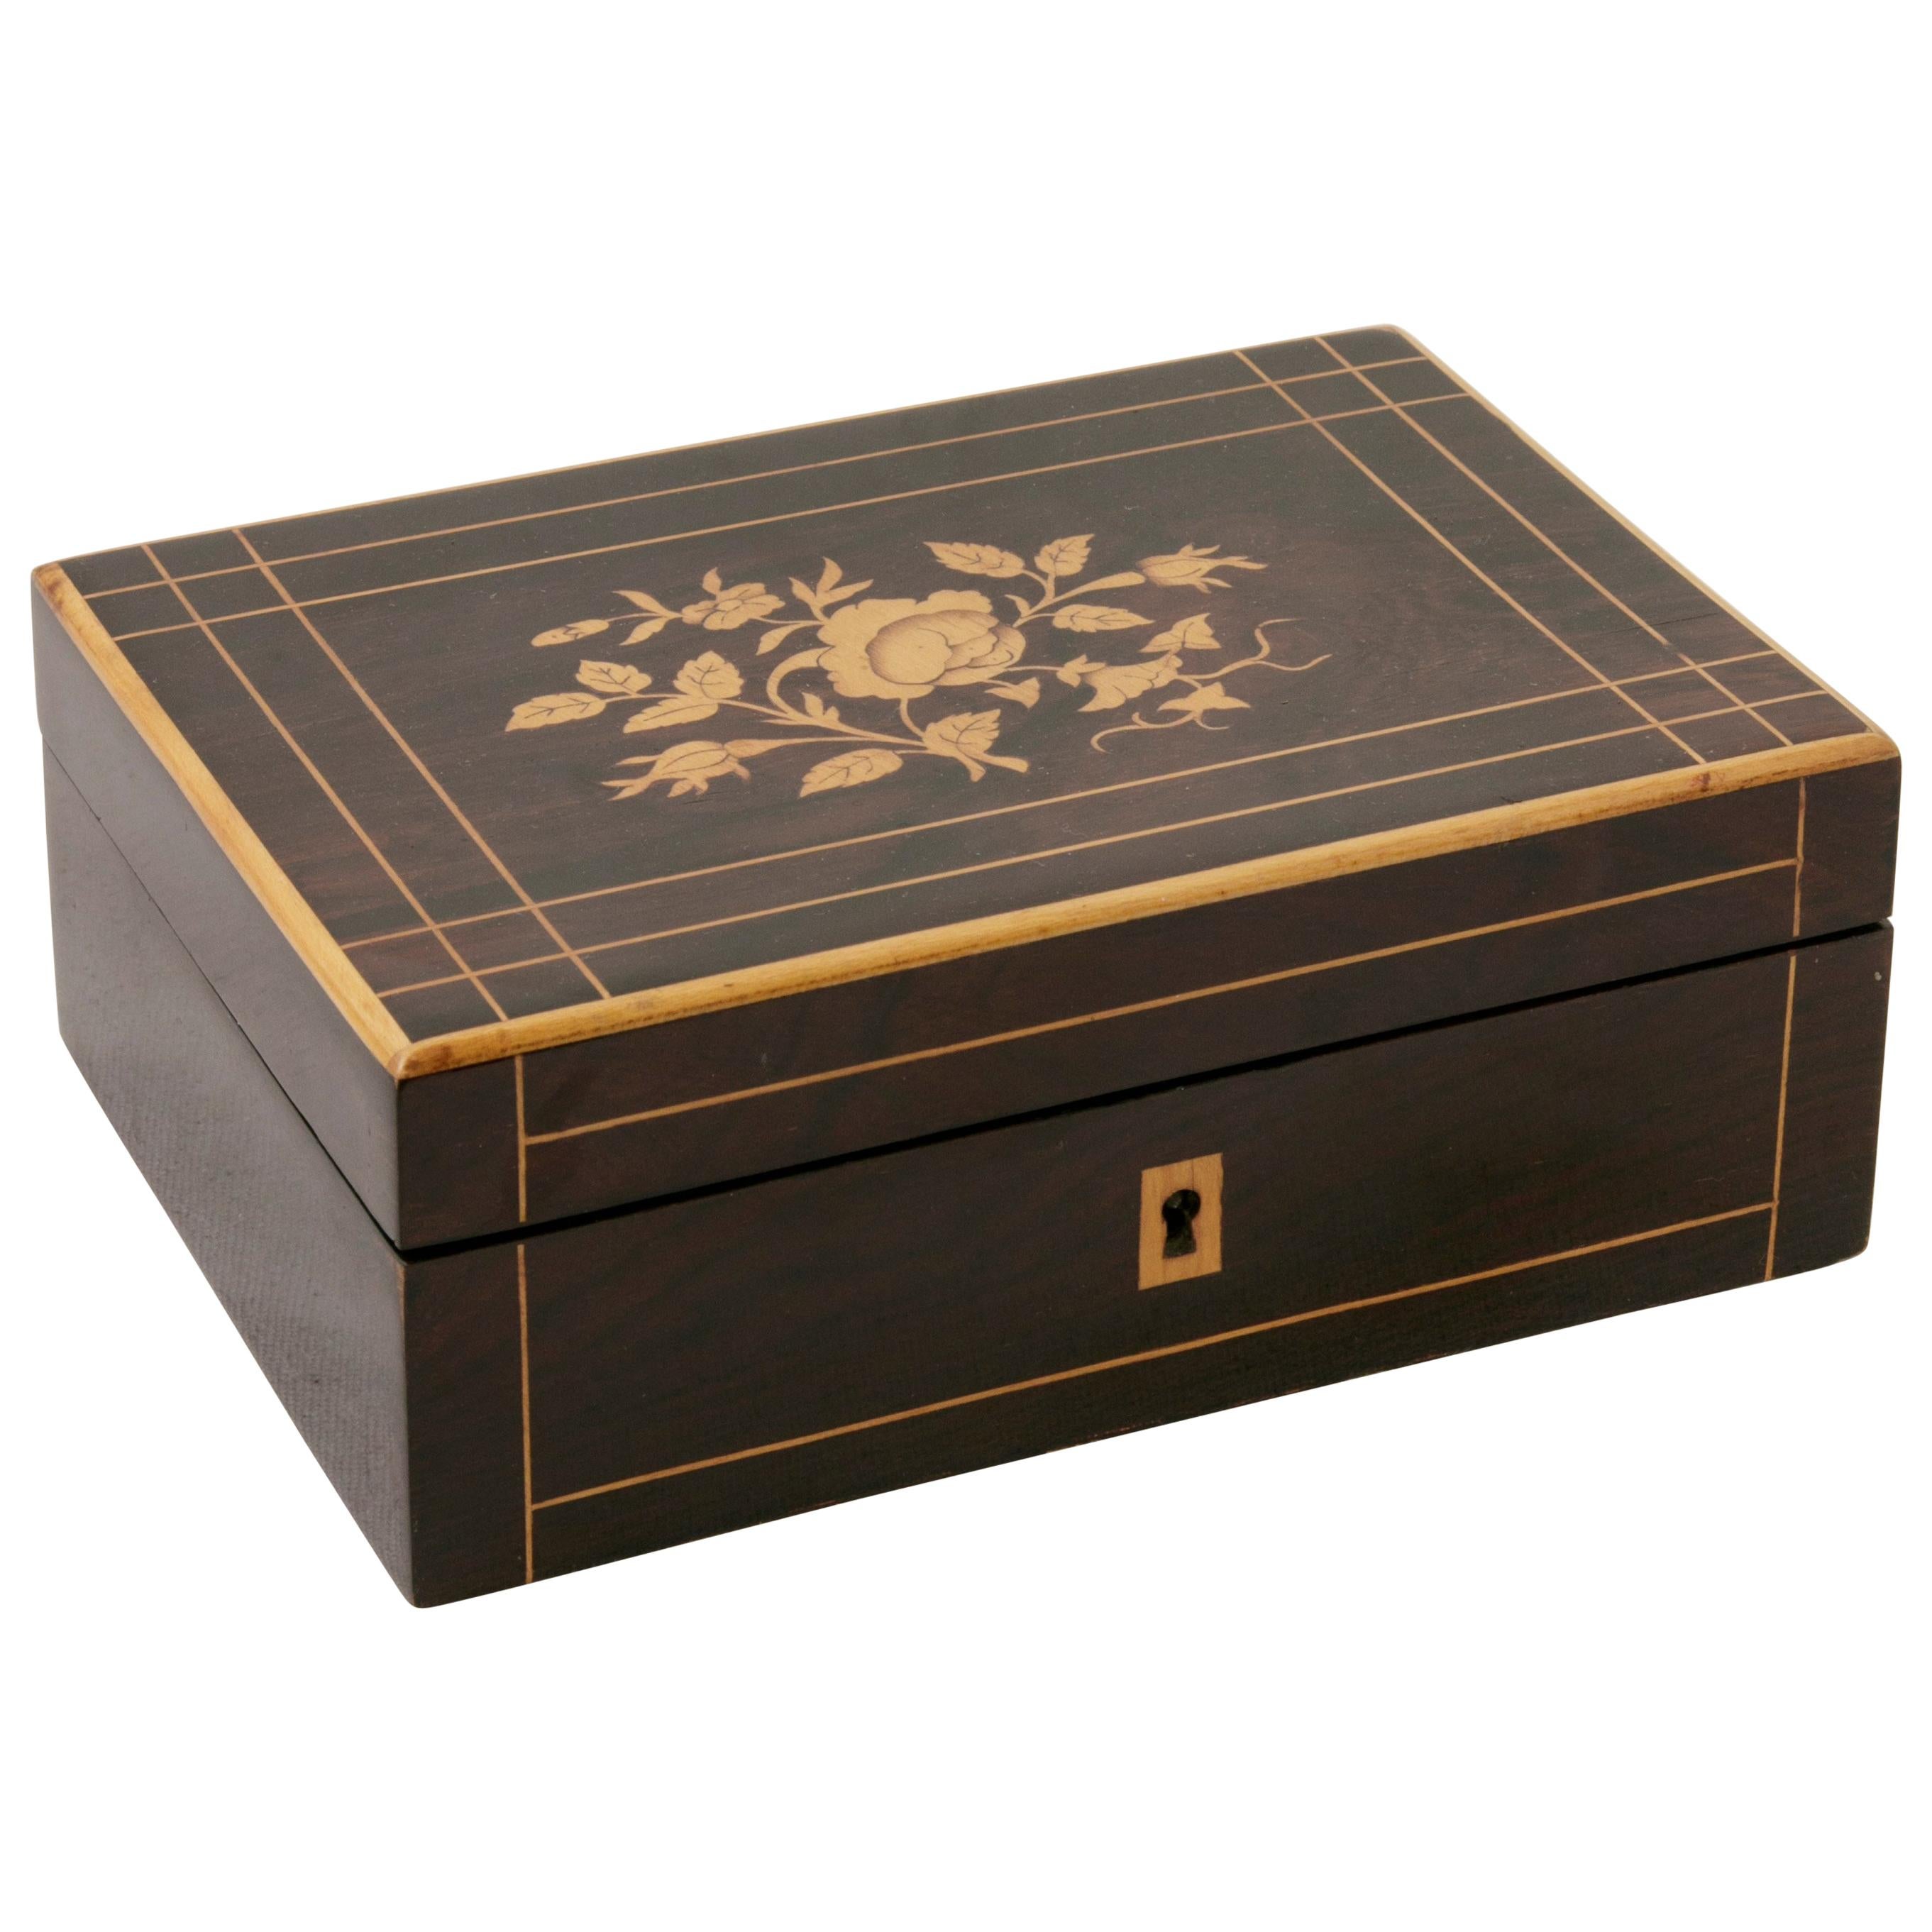 Early 19th Century French Charles X Palisander Sewing Box with Lemon Wood Inlay